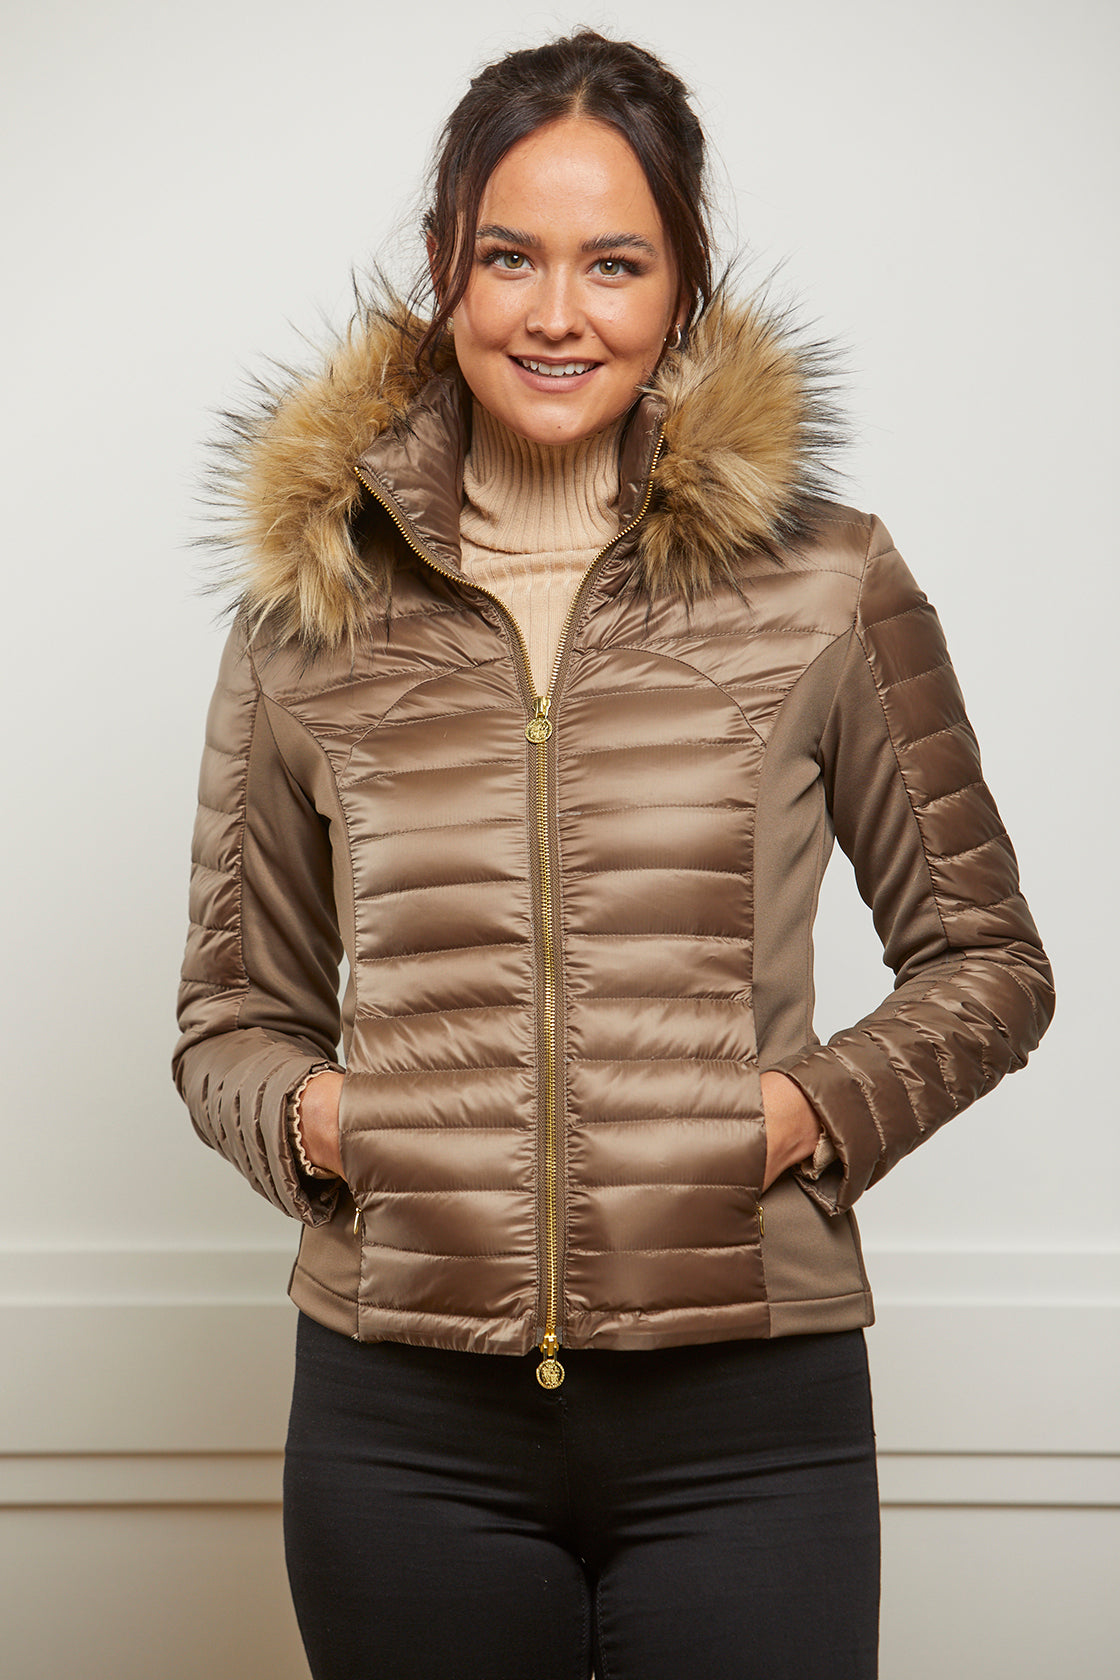 Model wearing a woman's puffer jacket in bronze, khaki colour. It has stretch sides, a gold zip and a detachable faux fur collar.